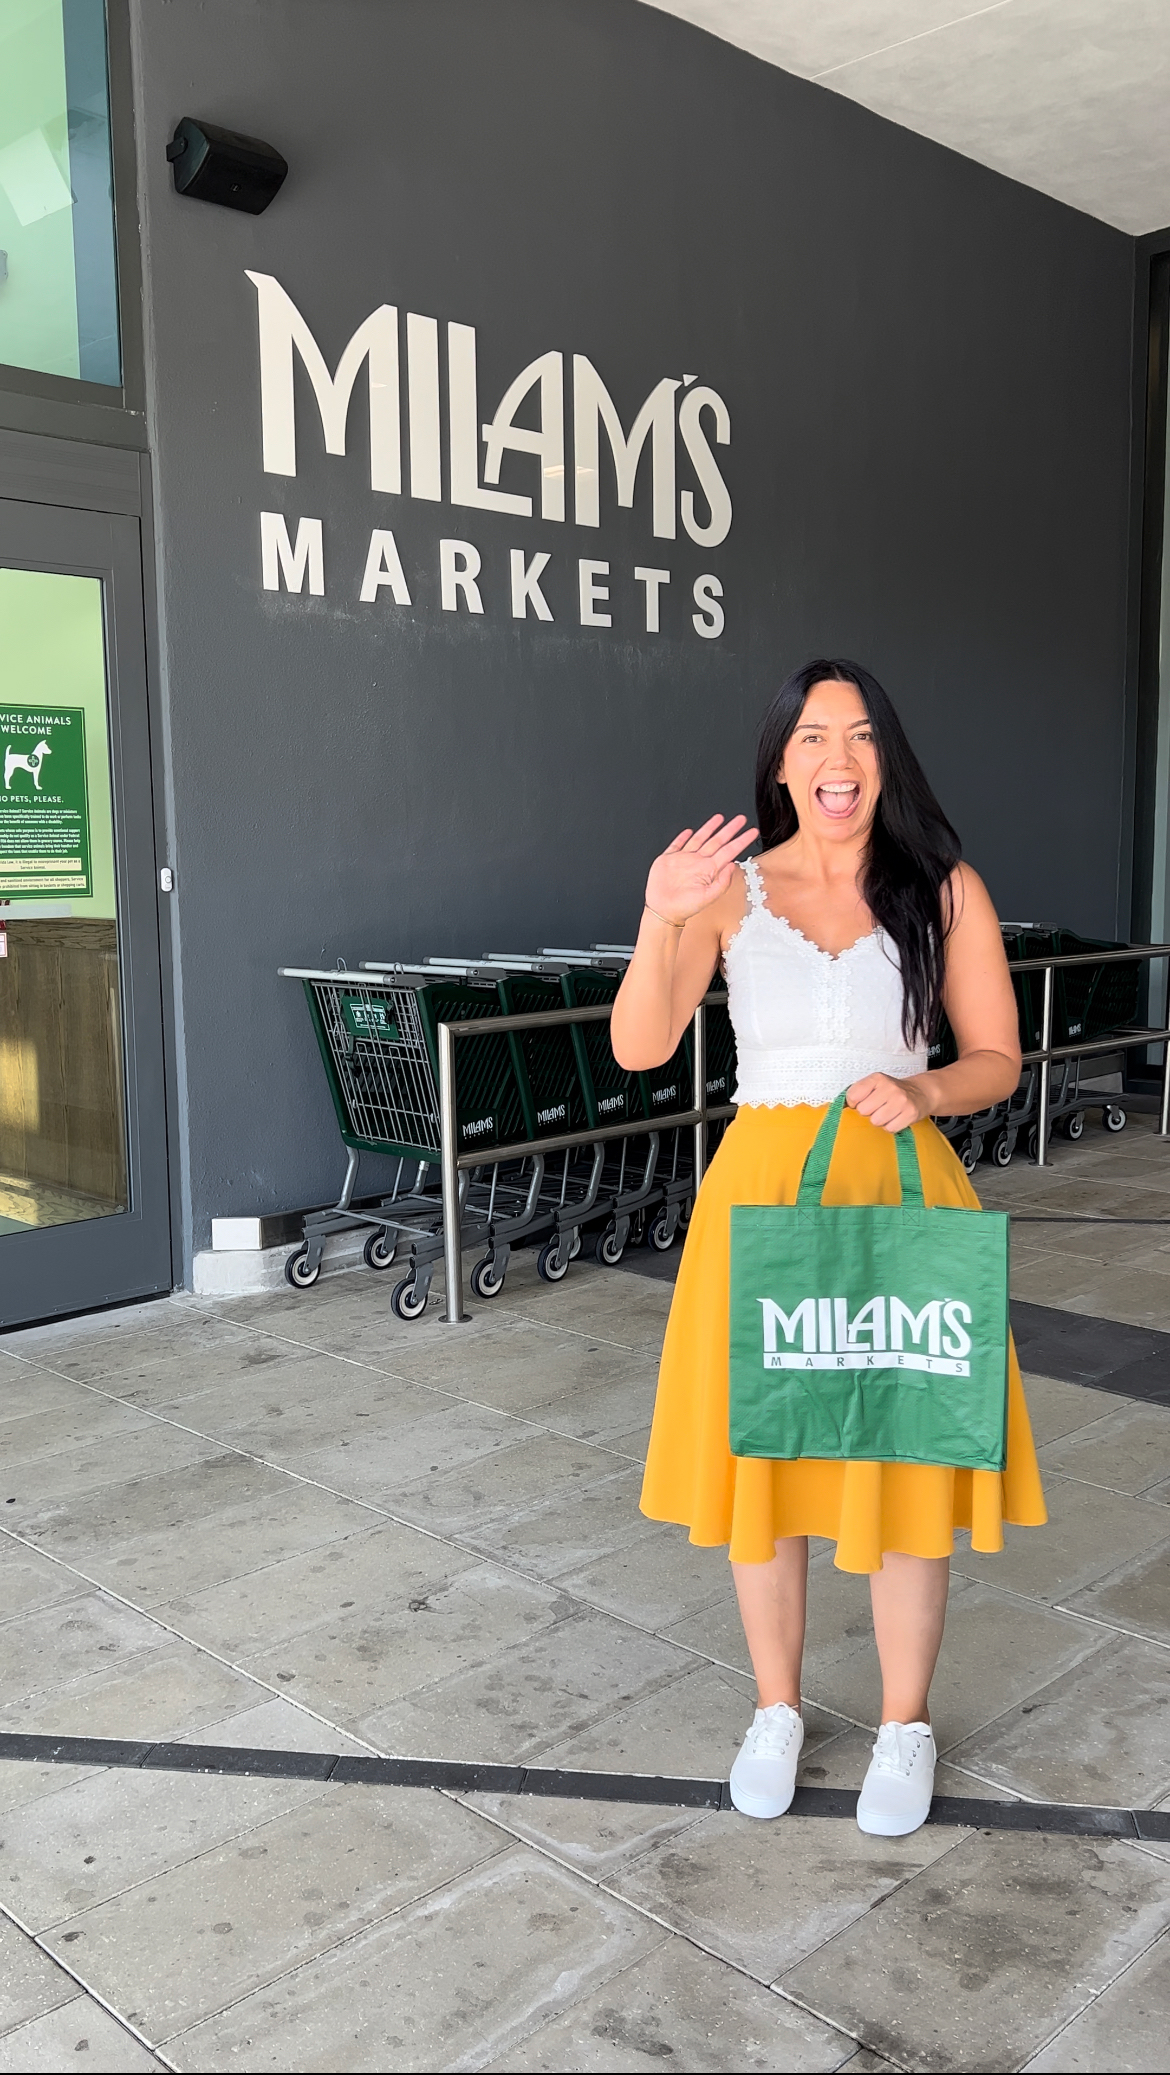 New Gourmet Market Opens in Coral Gables - Milam's Market